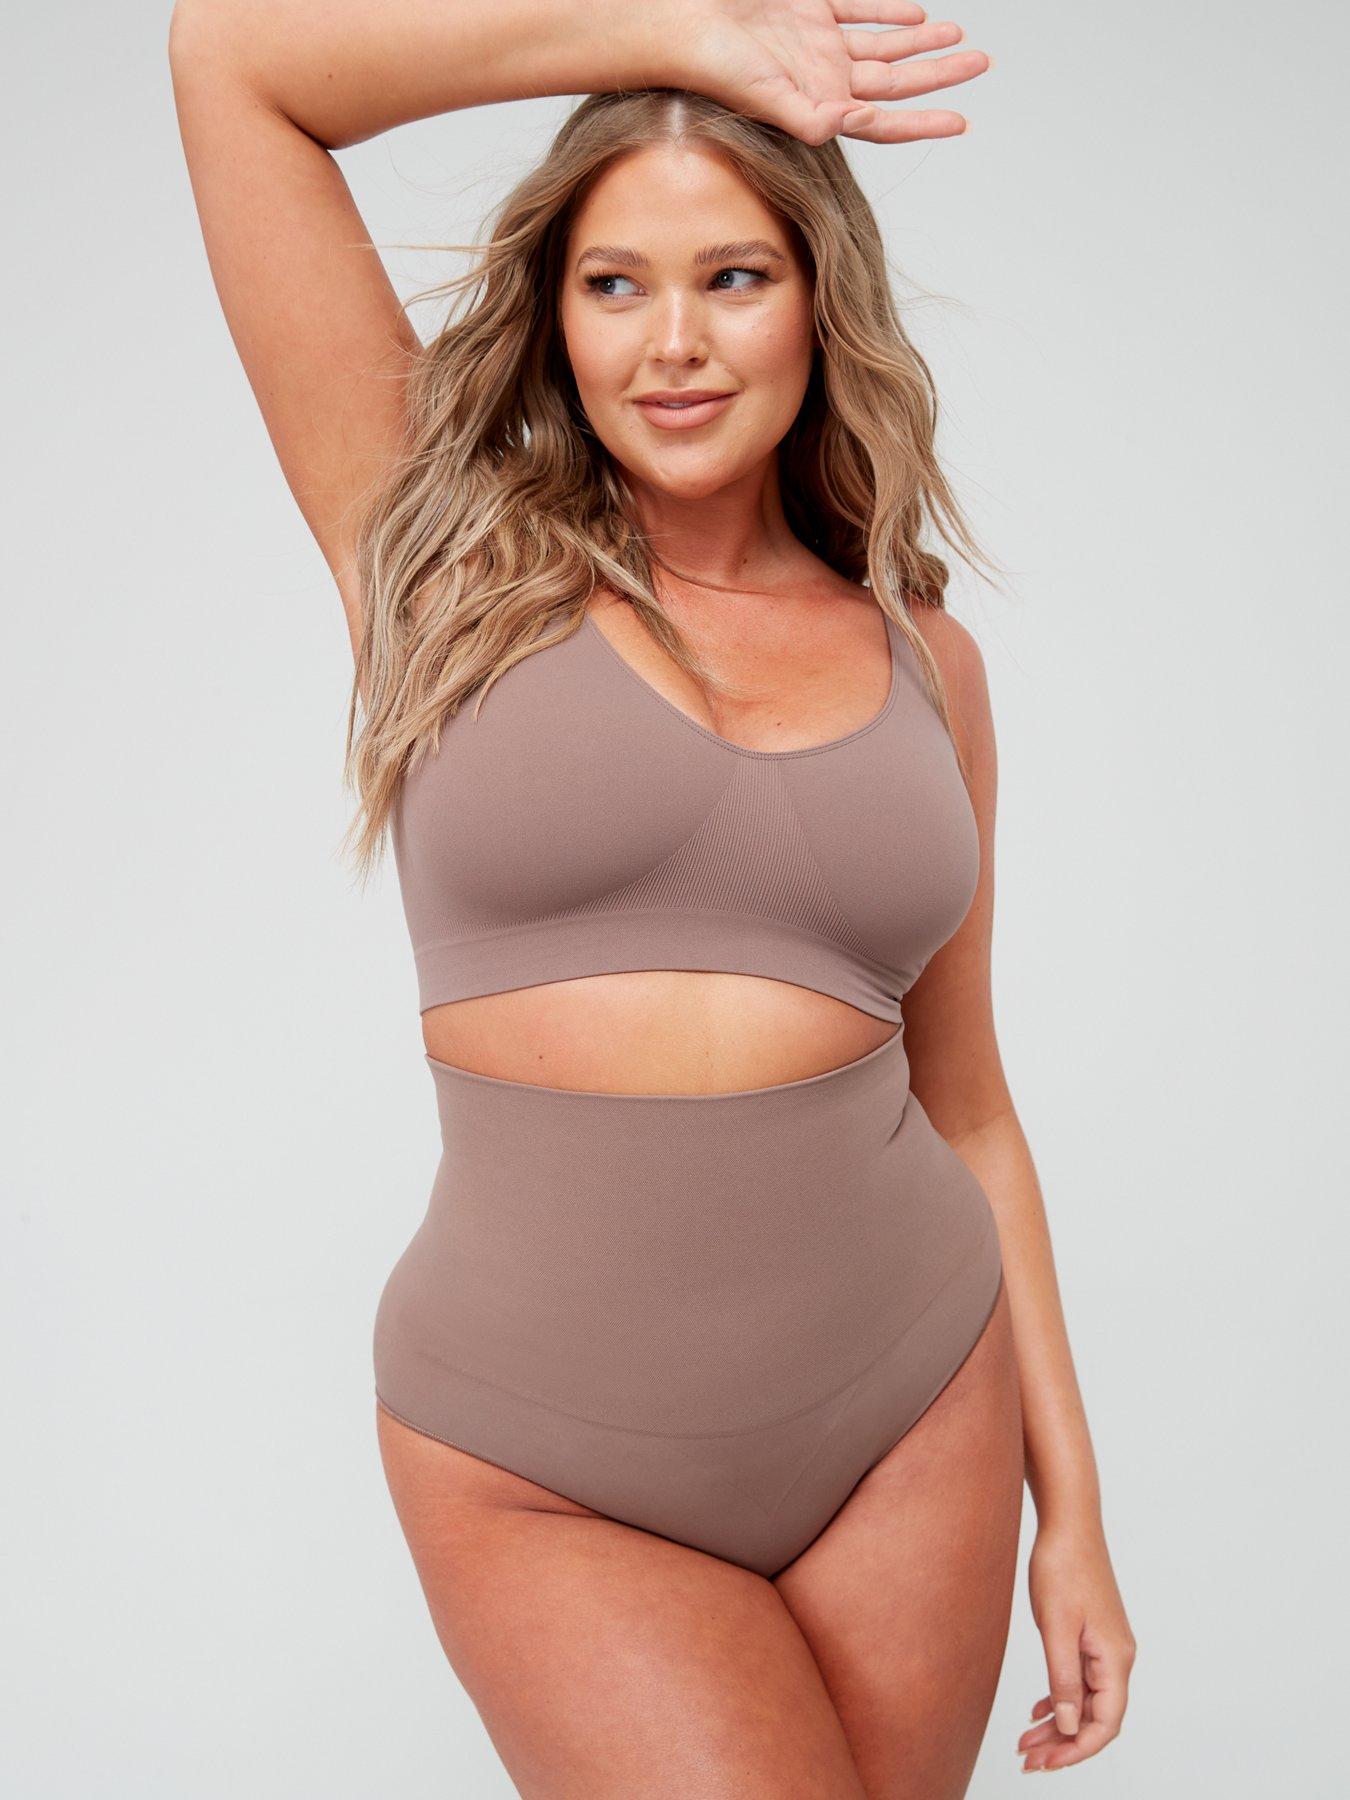 Simply Seamless Mid-rise Shaping Brief